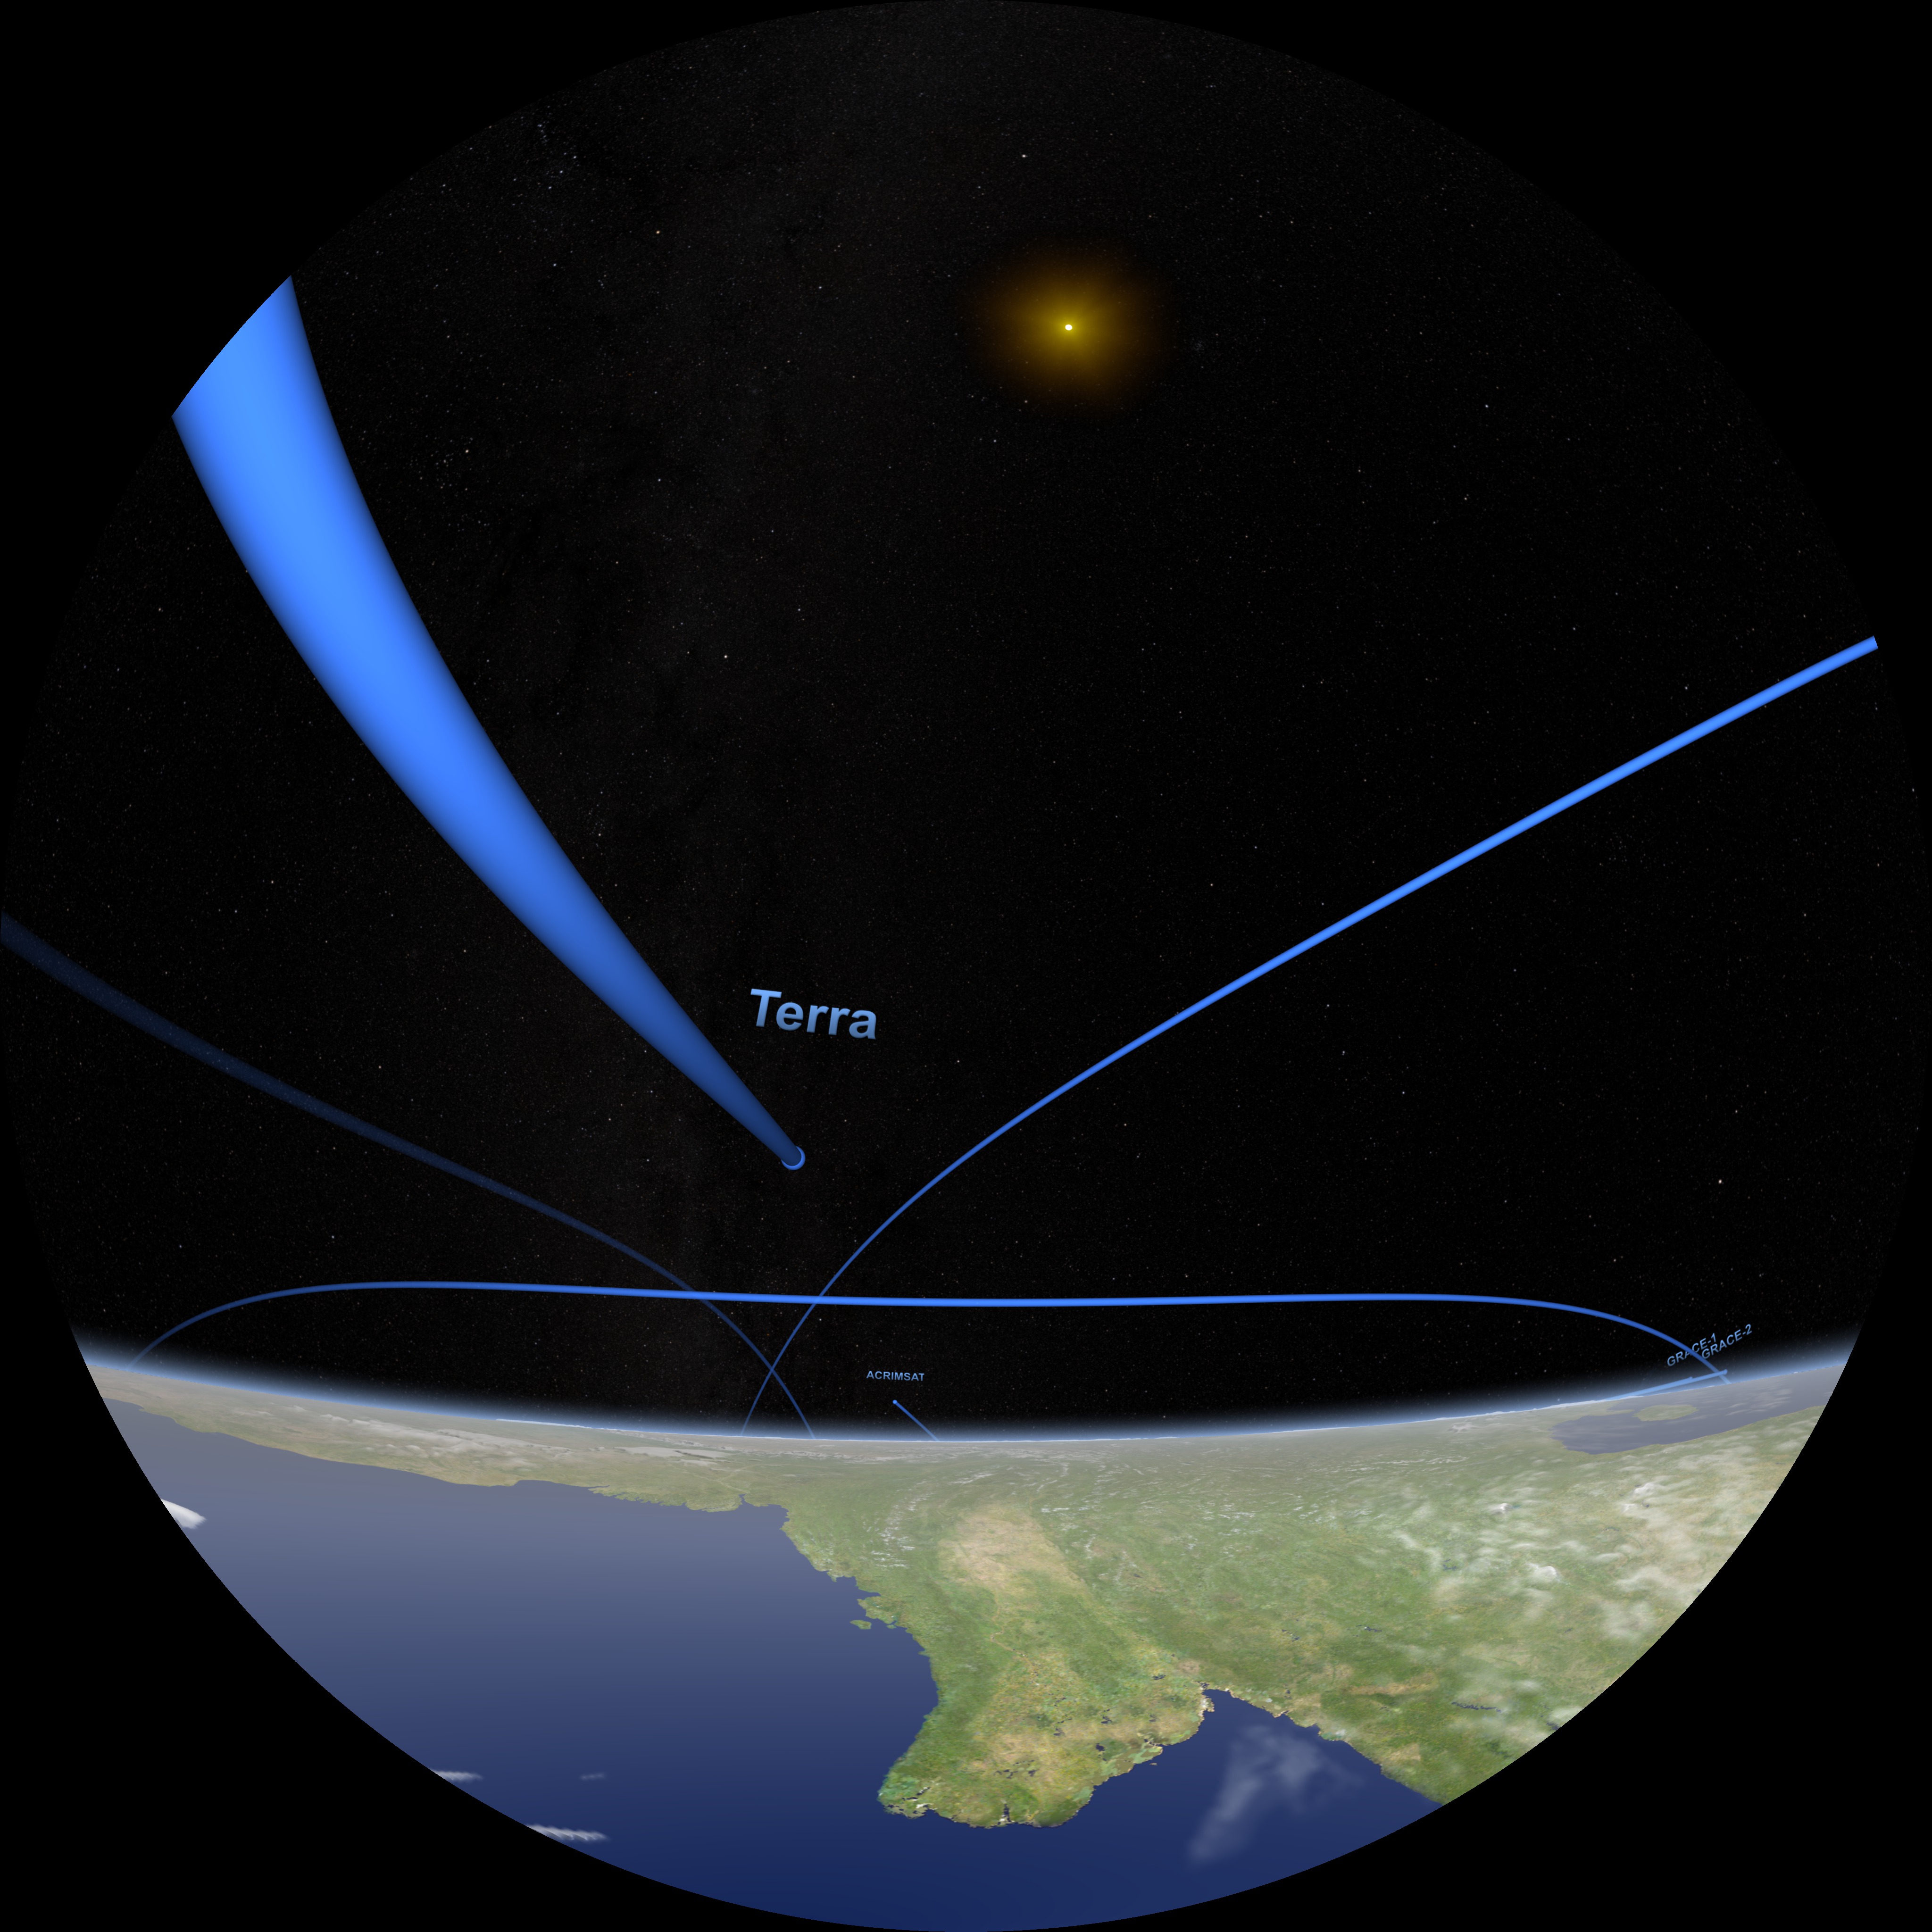 NASA's Earth observing fleet orbiting Earth with the Sun and star layers composited.  The individual layers are available below.